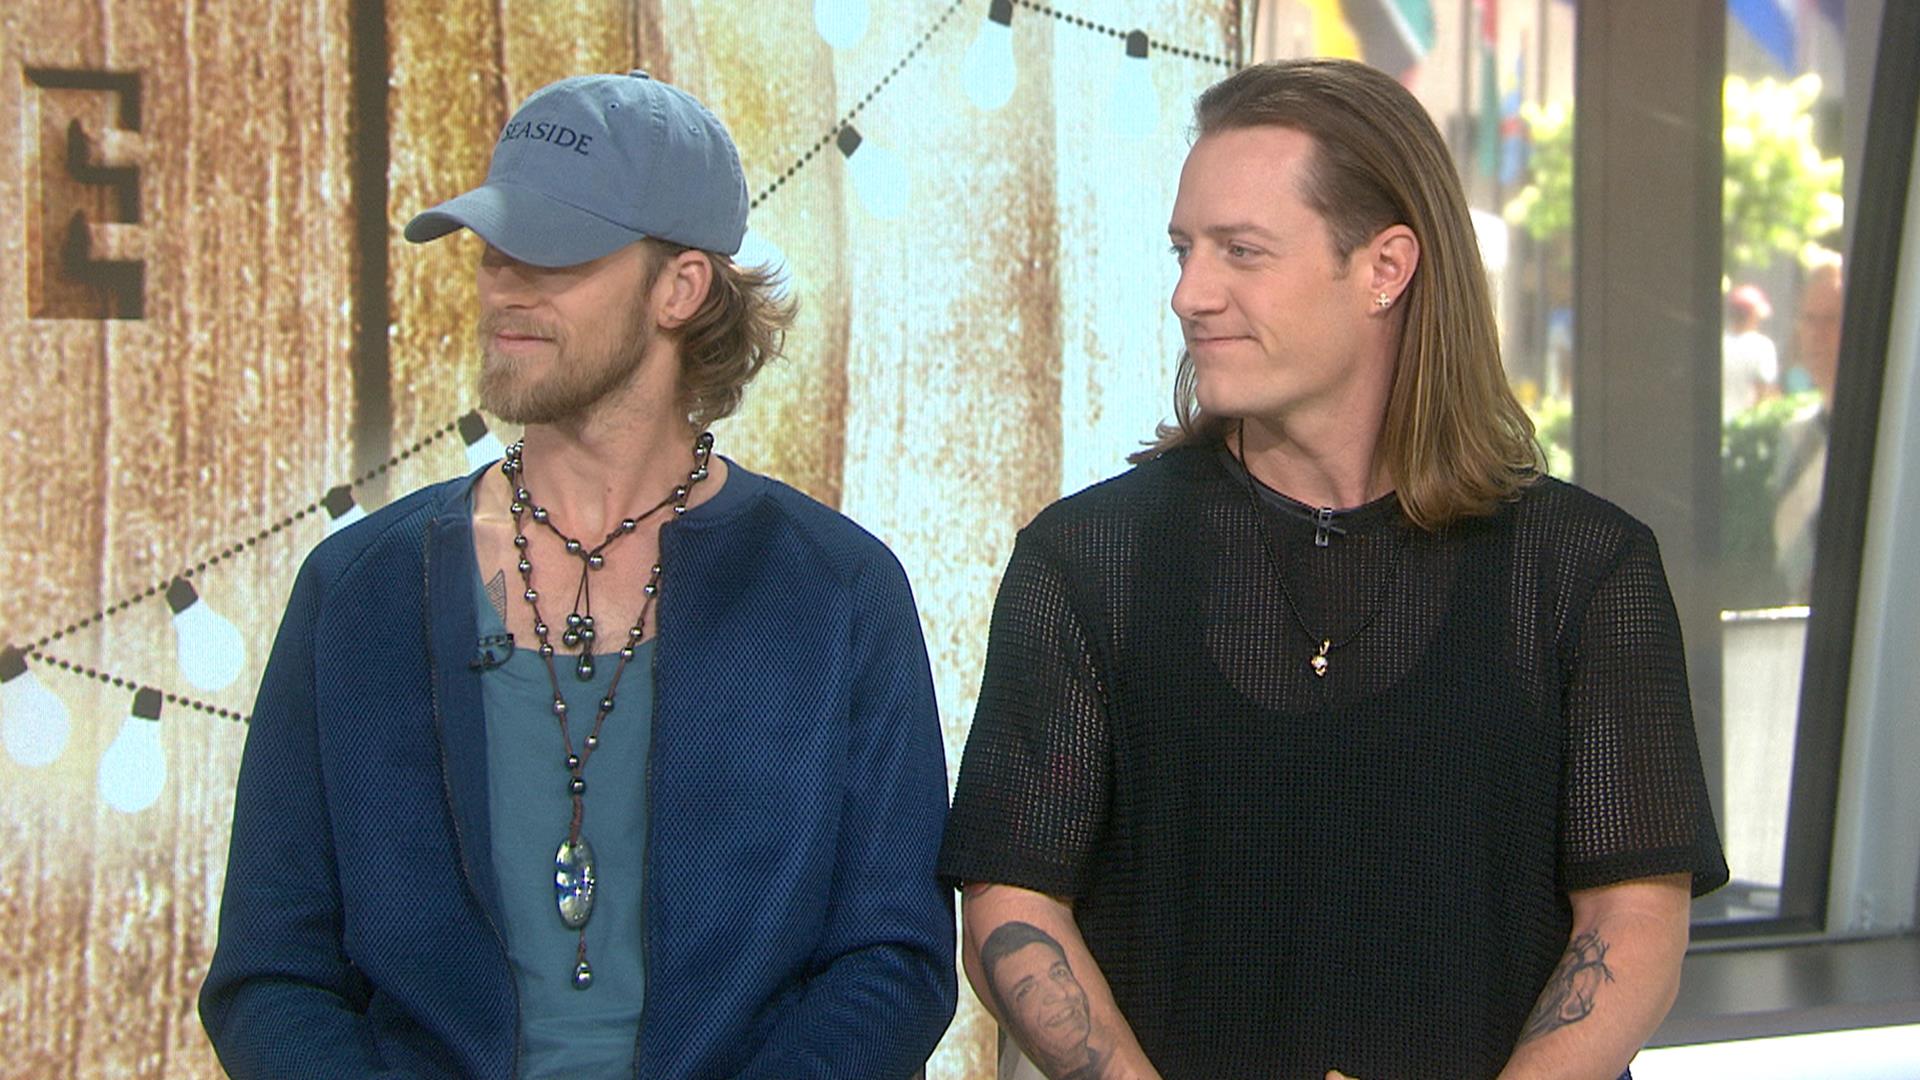 Florida Georgia Line's Tyler Hubbard says duo is not breaking up